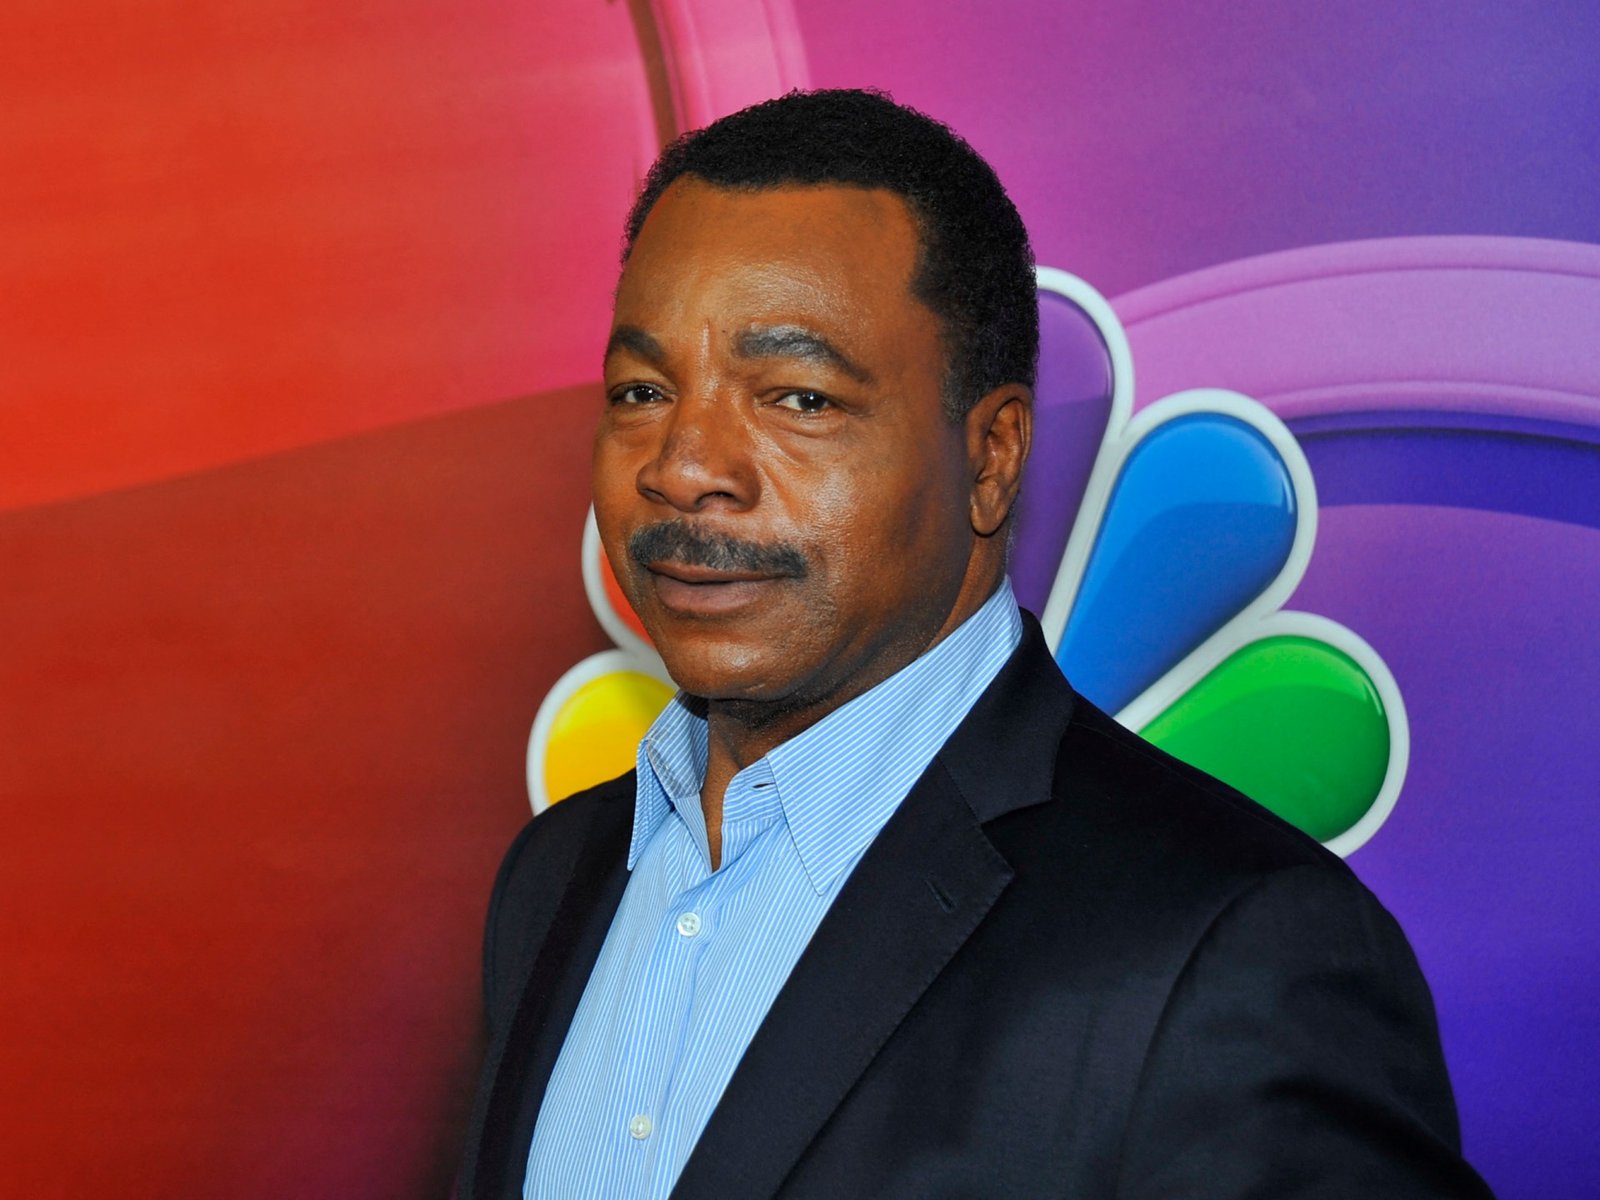 Carl Weathers star of Predator and Rocky films dies at 76 | Entertainment News